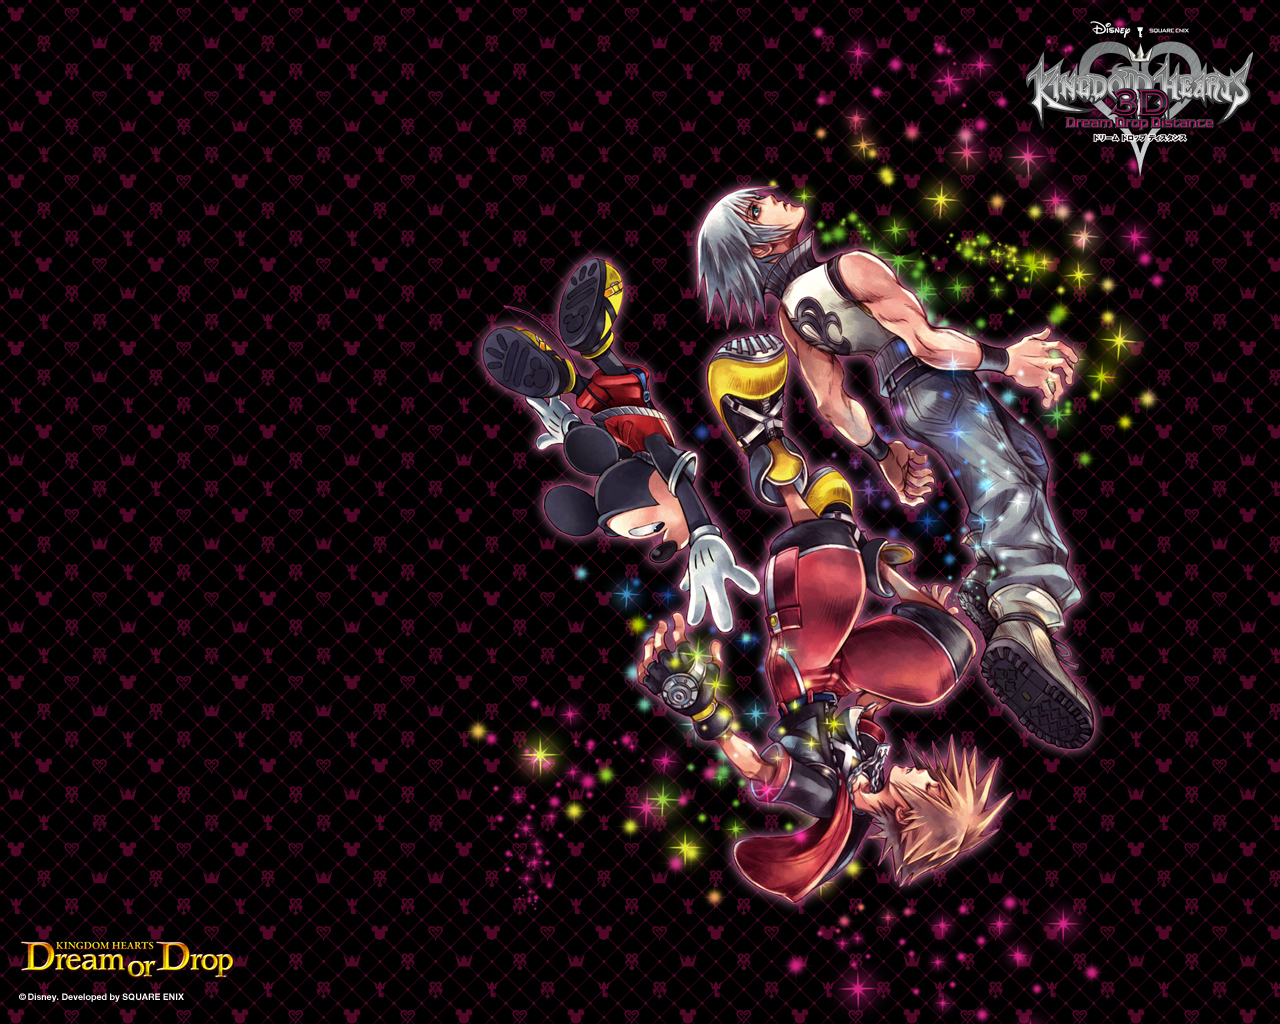 Kingdom Hearts 3d Launched On March 29th In Japan And Has Since